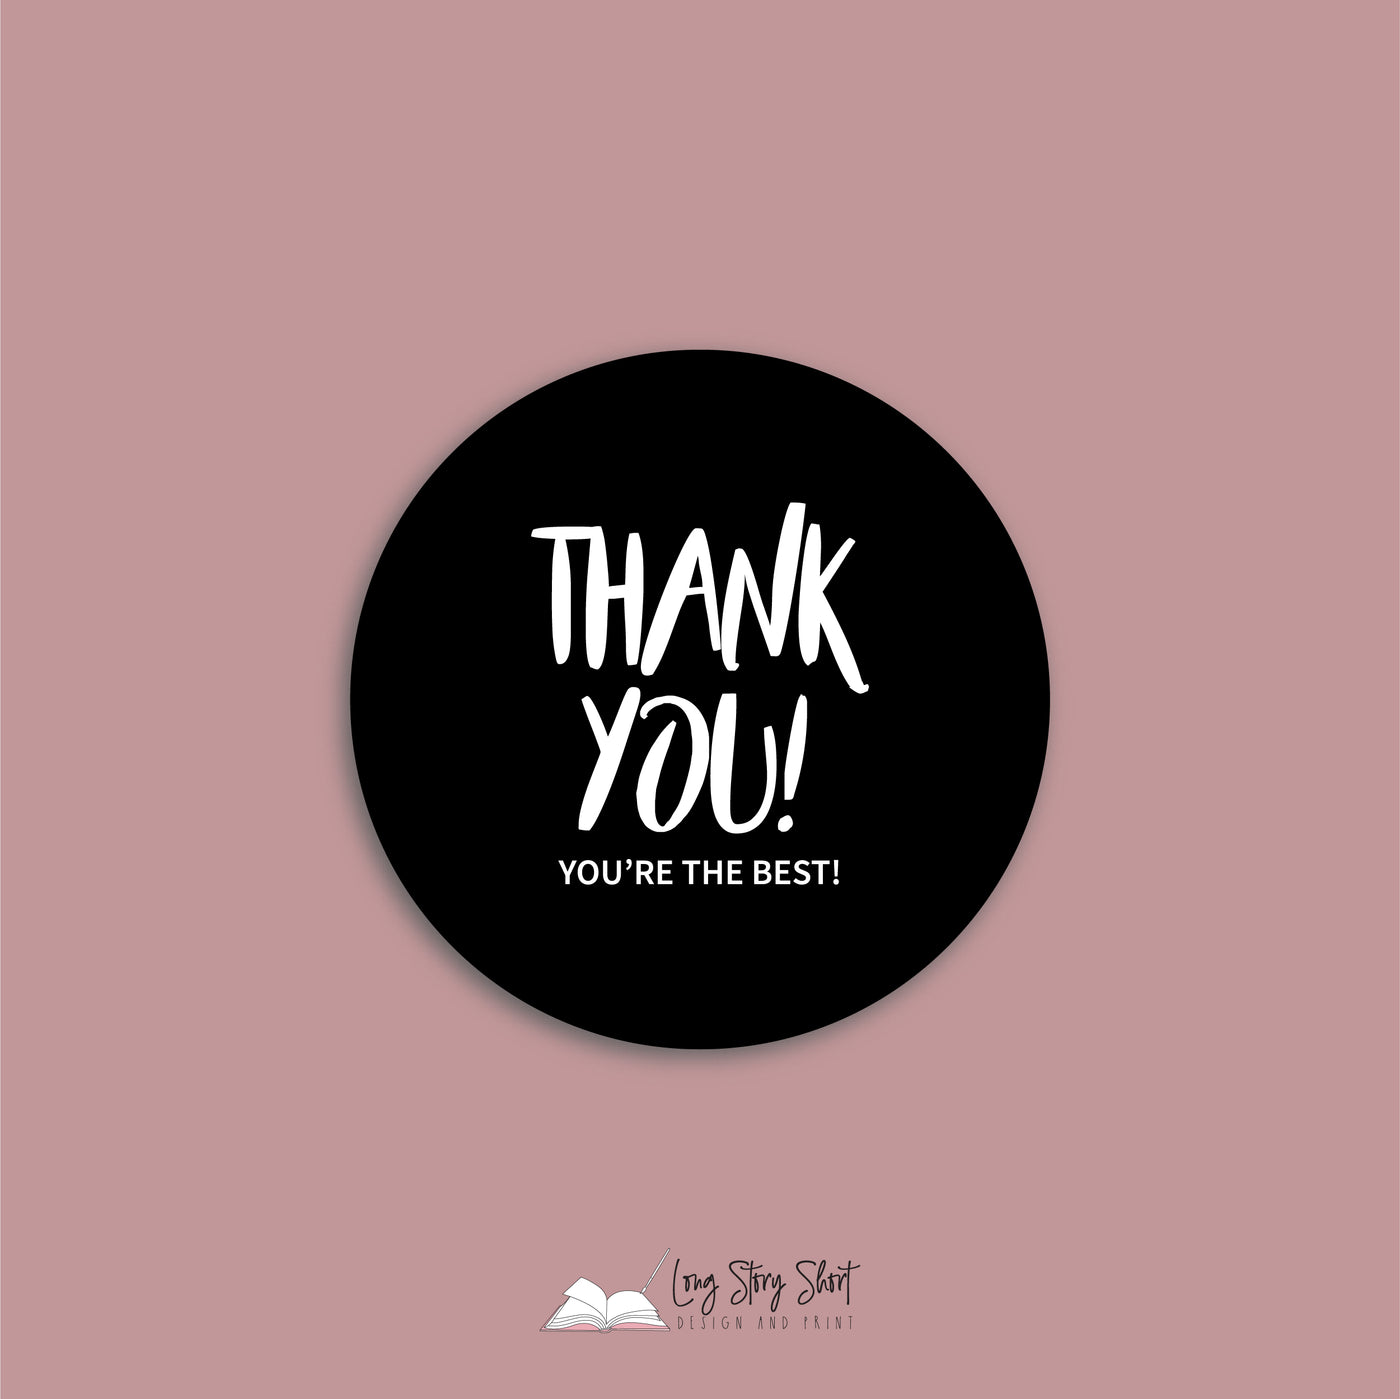 Thank you! You're the Best! Vinyl Label Pack